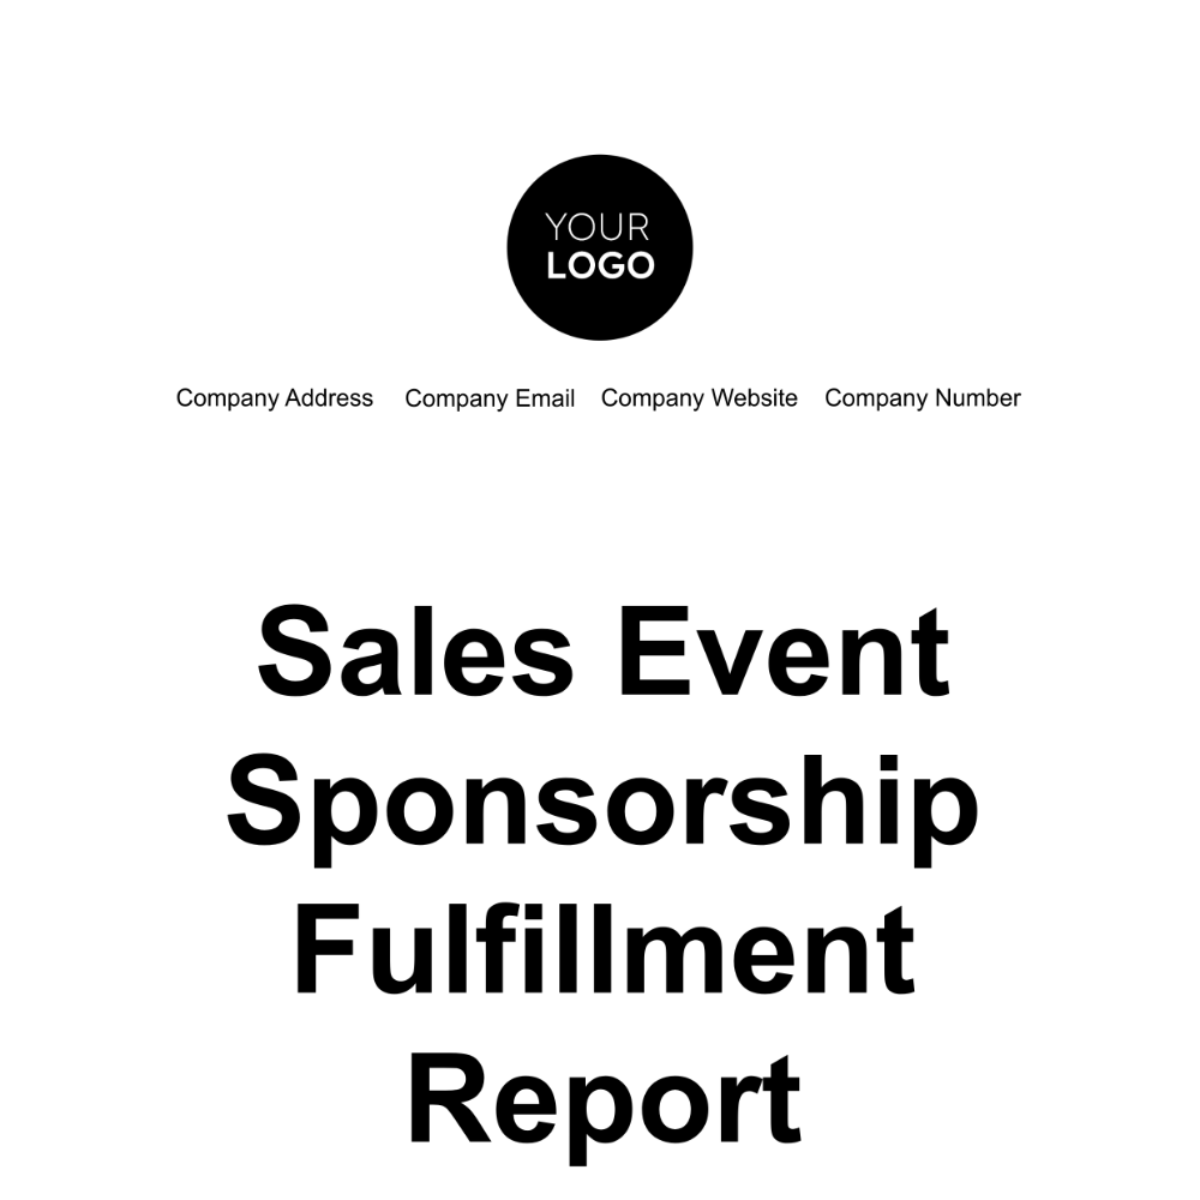 Free Sales Event Sponsorship Fulfillment Report Template